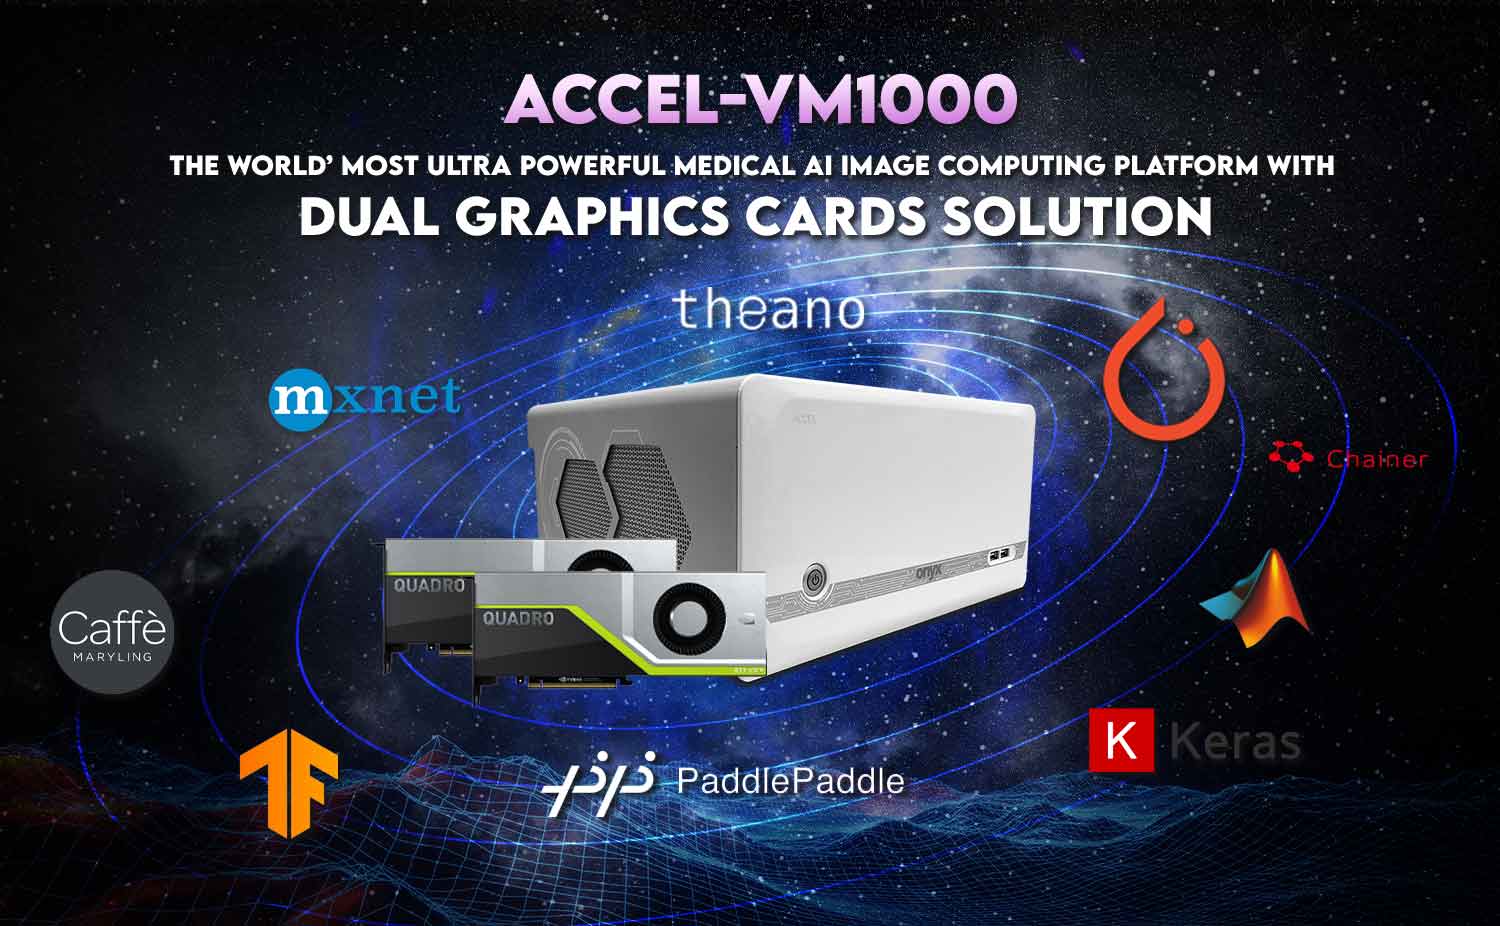 The world’ most Ultra Powerful Medical AI image Computing Platform with  dual graphics cards solution